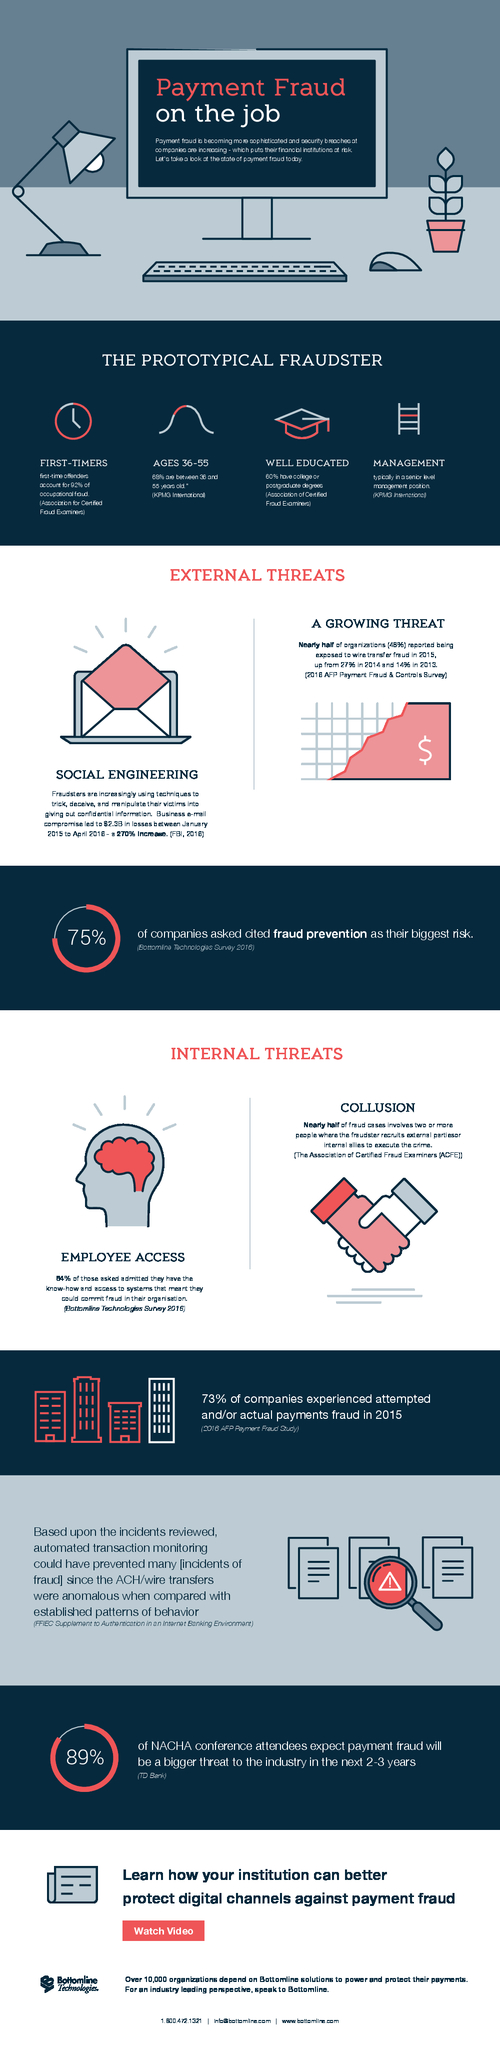 Fraud on the Job; 73% of Businesses Hit with Actual or Attempted Payment Fraud